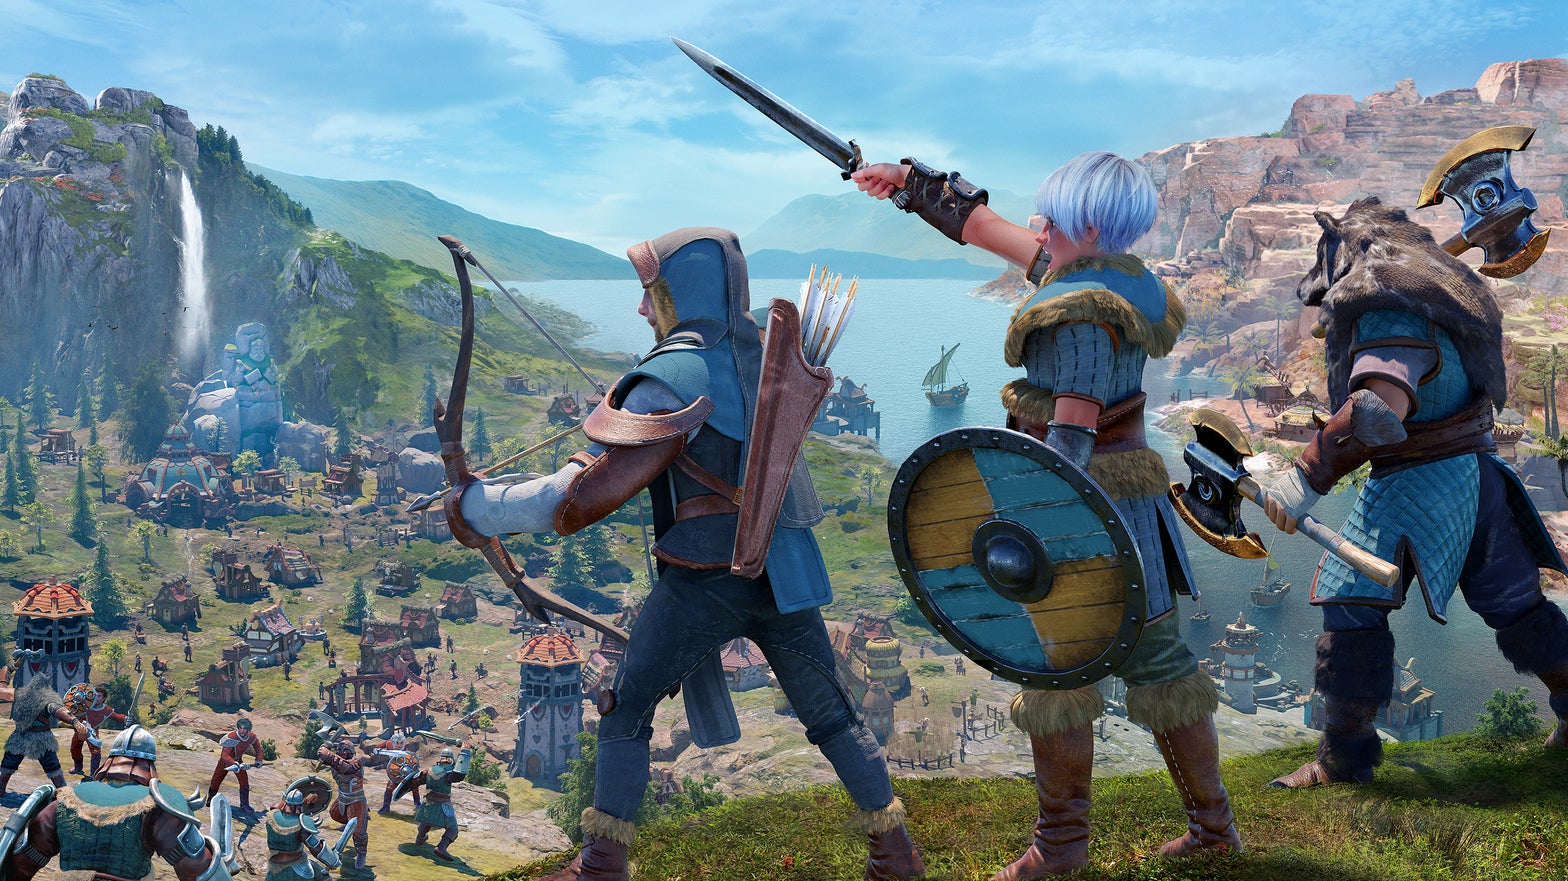 Image for Ubisoft's The Settlers reboot launches in March